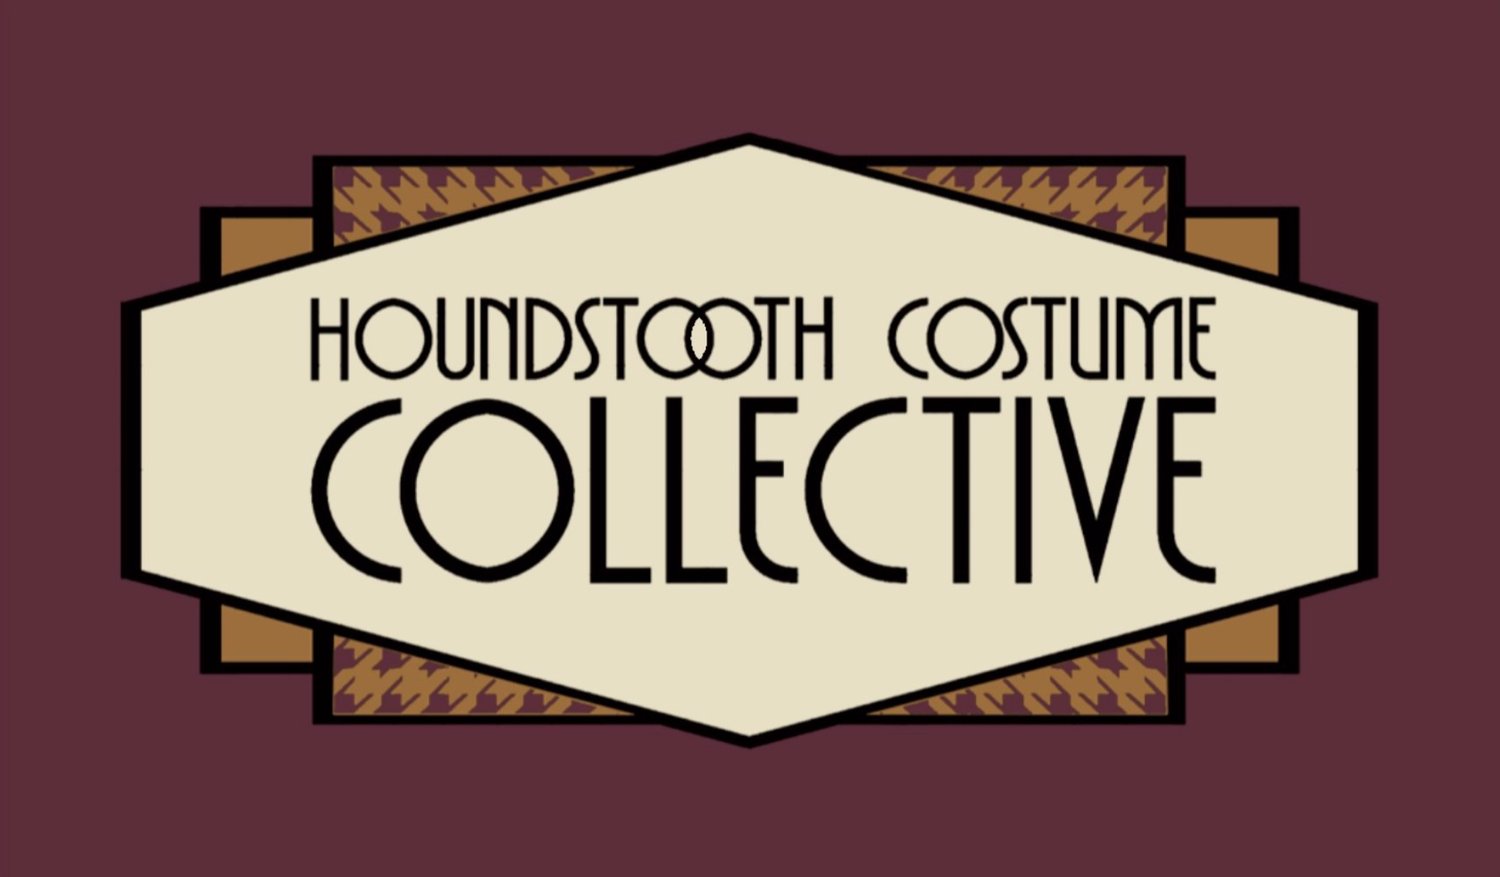 Houndstooth Costume Collective